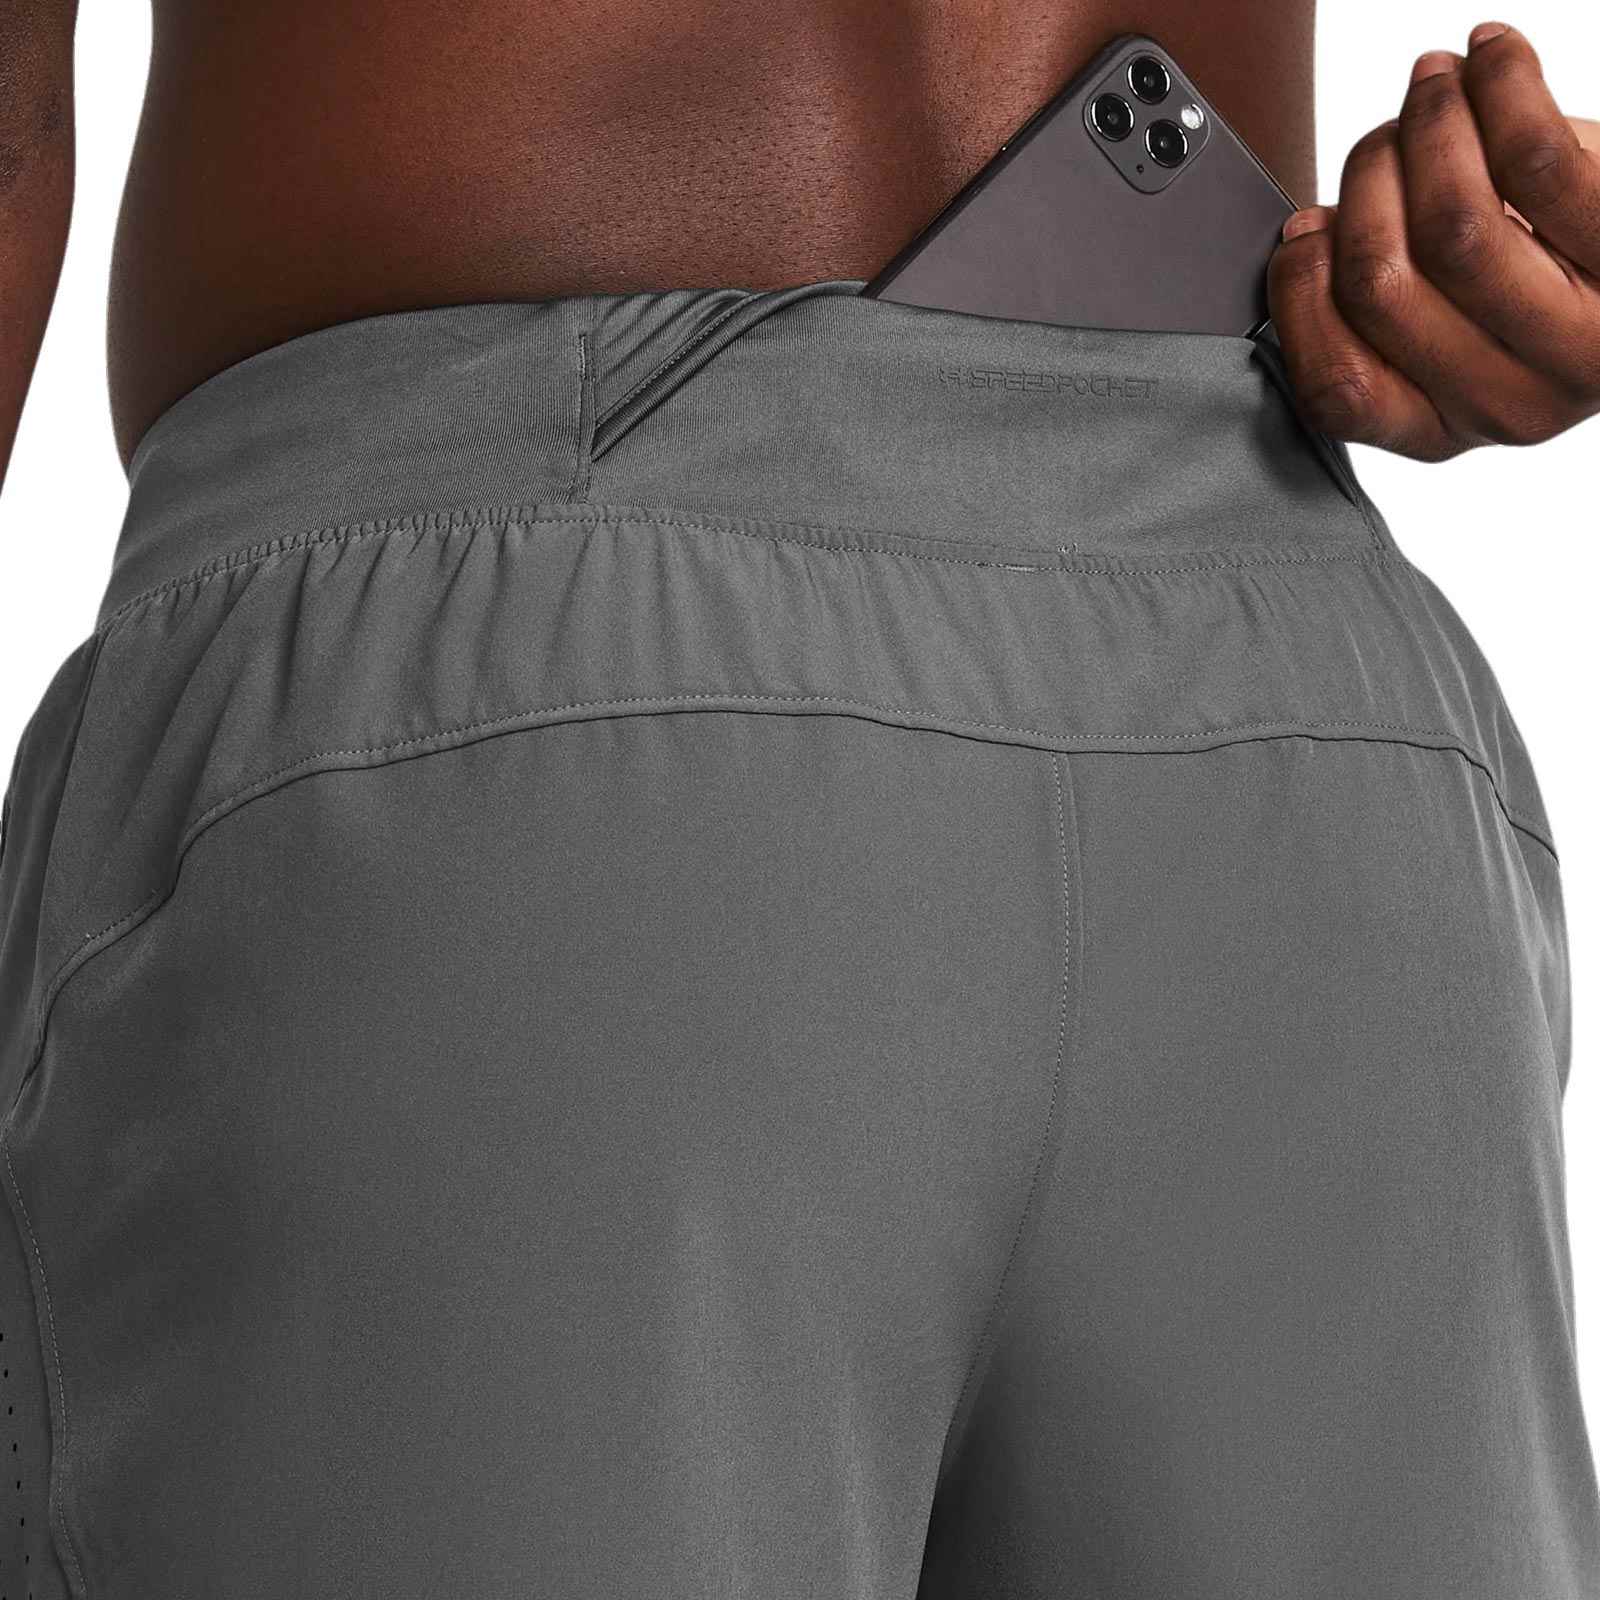 UNDER ARMOUR LAUNCH 5-INCH MENS SHORTS